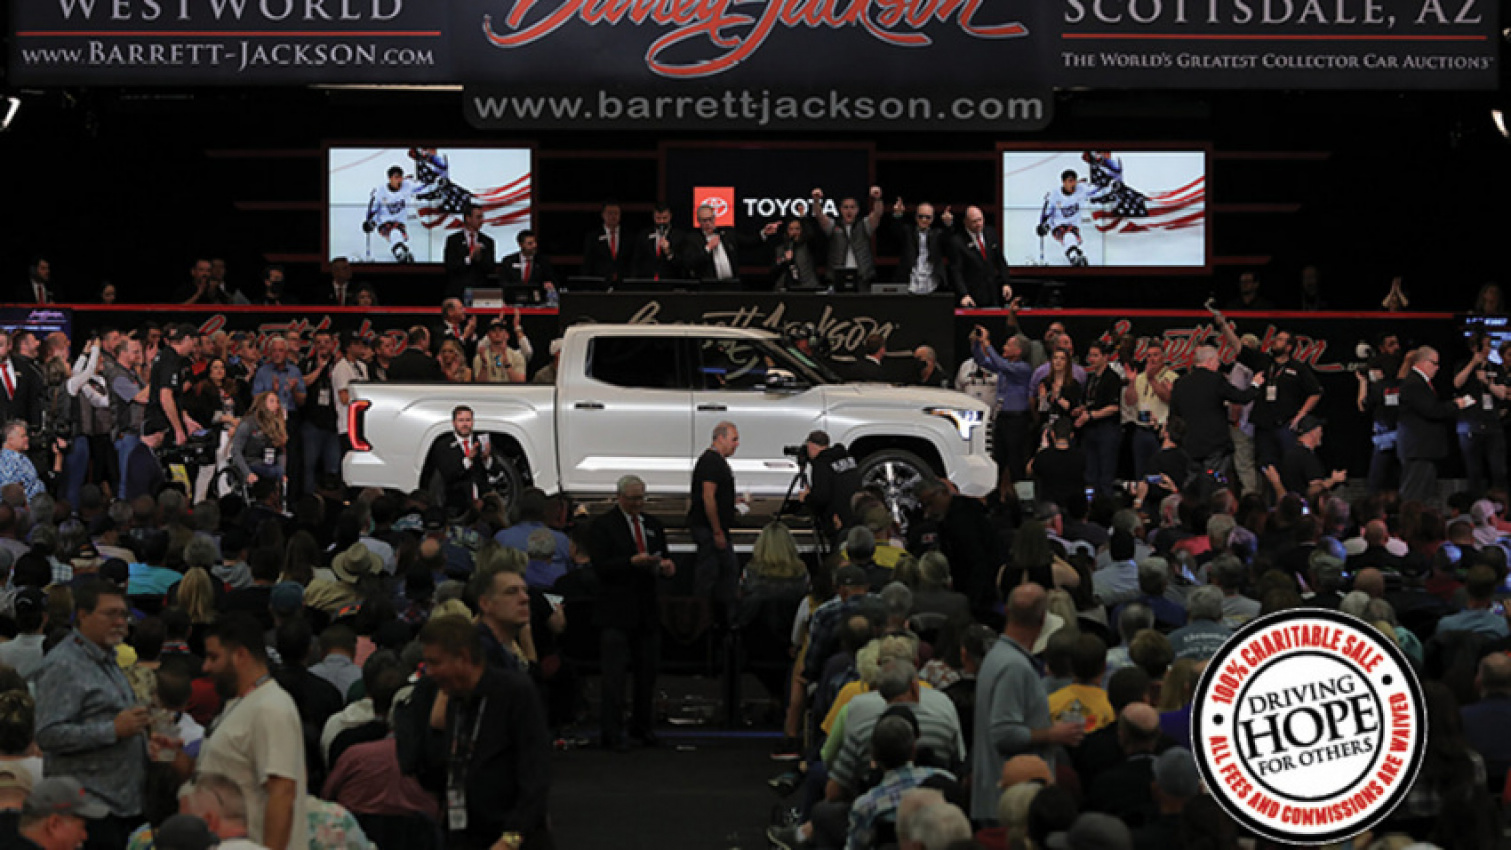 autos, cars, toyota, auctions, off-road vehicles, truck, toyota tundra capstone #001 sells for $700,000